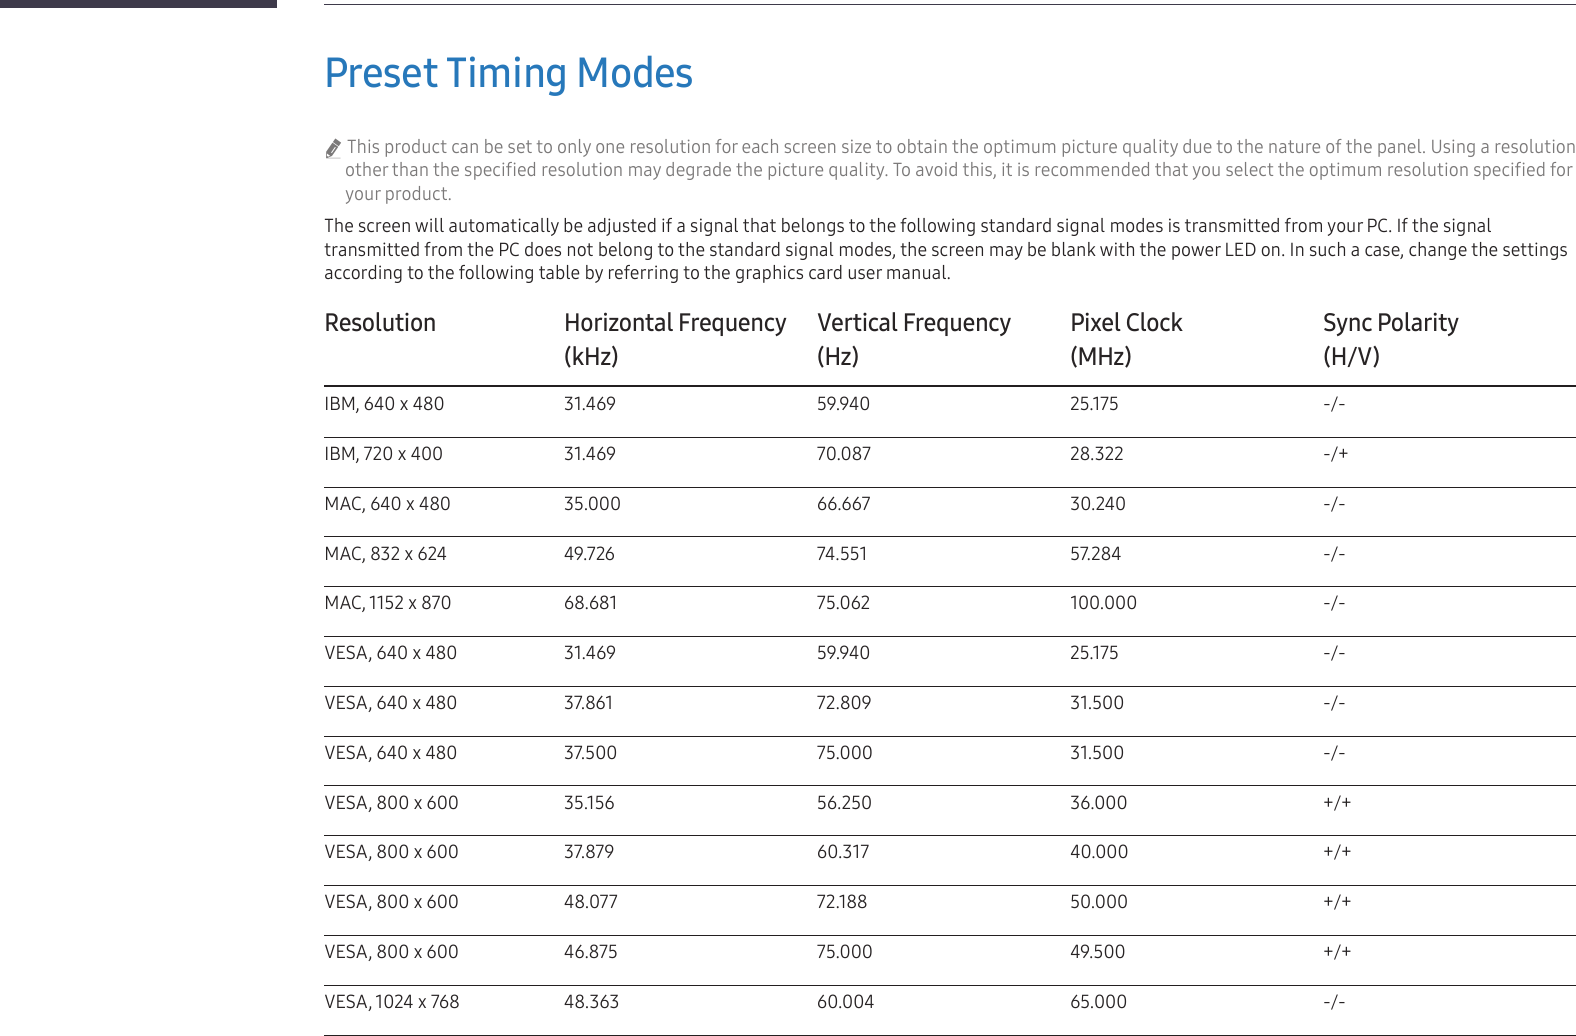 47Preset Timing Modes &quot;This product can be set to only one resolution for each screen size to obtain the optimum picture quality due to the nature of the panel. Using a resolution other than the specified resolution may degrade the picture quality. To avoid this, it is recommended that you select the optimum resolution specified for your product.The screen will automatically be adjusted if a signal that belongs to the following standard signal modes is transmitted from your PC. If the signal transmitted from the PC does not belong to the standard signal modes, the screen may be blank with the power LED on. In such a case, change the settings according to the following table by referring to the graphics card user manual.Resolution Horizontal Frequency(kHz)Vertical Frequency(Hz)Pixel Clock(MHz)Sync Polarity(H/V)IBM, 640 x 480 31.469  59.940  25.175  -/-IBM, 720 x 400 31.469  70.087  28.322  -/+MAC, 640 x 480 35.000  66.667  30.240  -/-MAC, 832 x 624 49.726  74.551  57.284  -/-MAC, 1152 x 870 68.681  75.062  100.000  -/-VESA, 640 x 480 31.469  59.940  25.175  -/-VESA, 640 x 480 37.861  72.809  31.500  -/-VESA, 640 x 480 37.500  75.000  31.500  -/-VESA, 800 x 600 35.156  56.250  36.000  +/+VESA, 800 x 600 37.879  60.317  40.000  +/+VESA, 800 x 600 48.077  72.188  50.000  +/+VESA, 800 x 600 46.875  75.000  49.500  +/+VESA, 1024 x 768 48.363  60.004  65.000  -/-